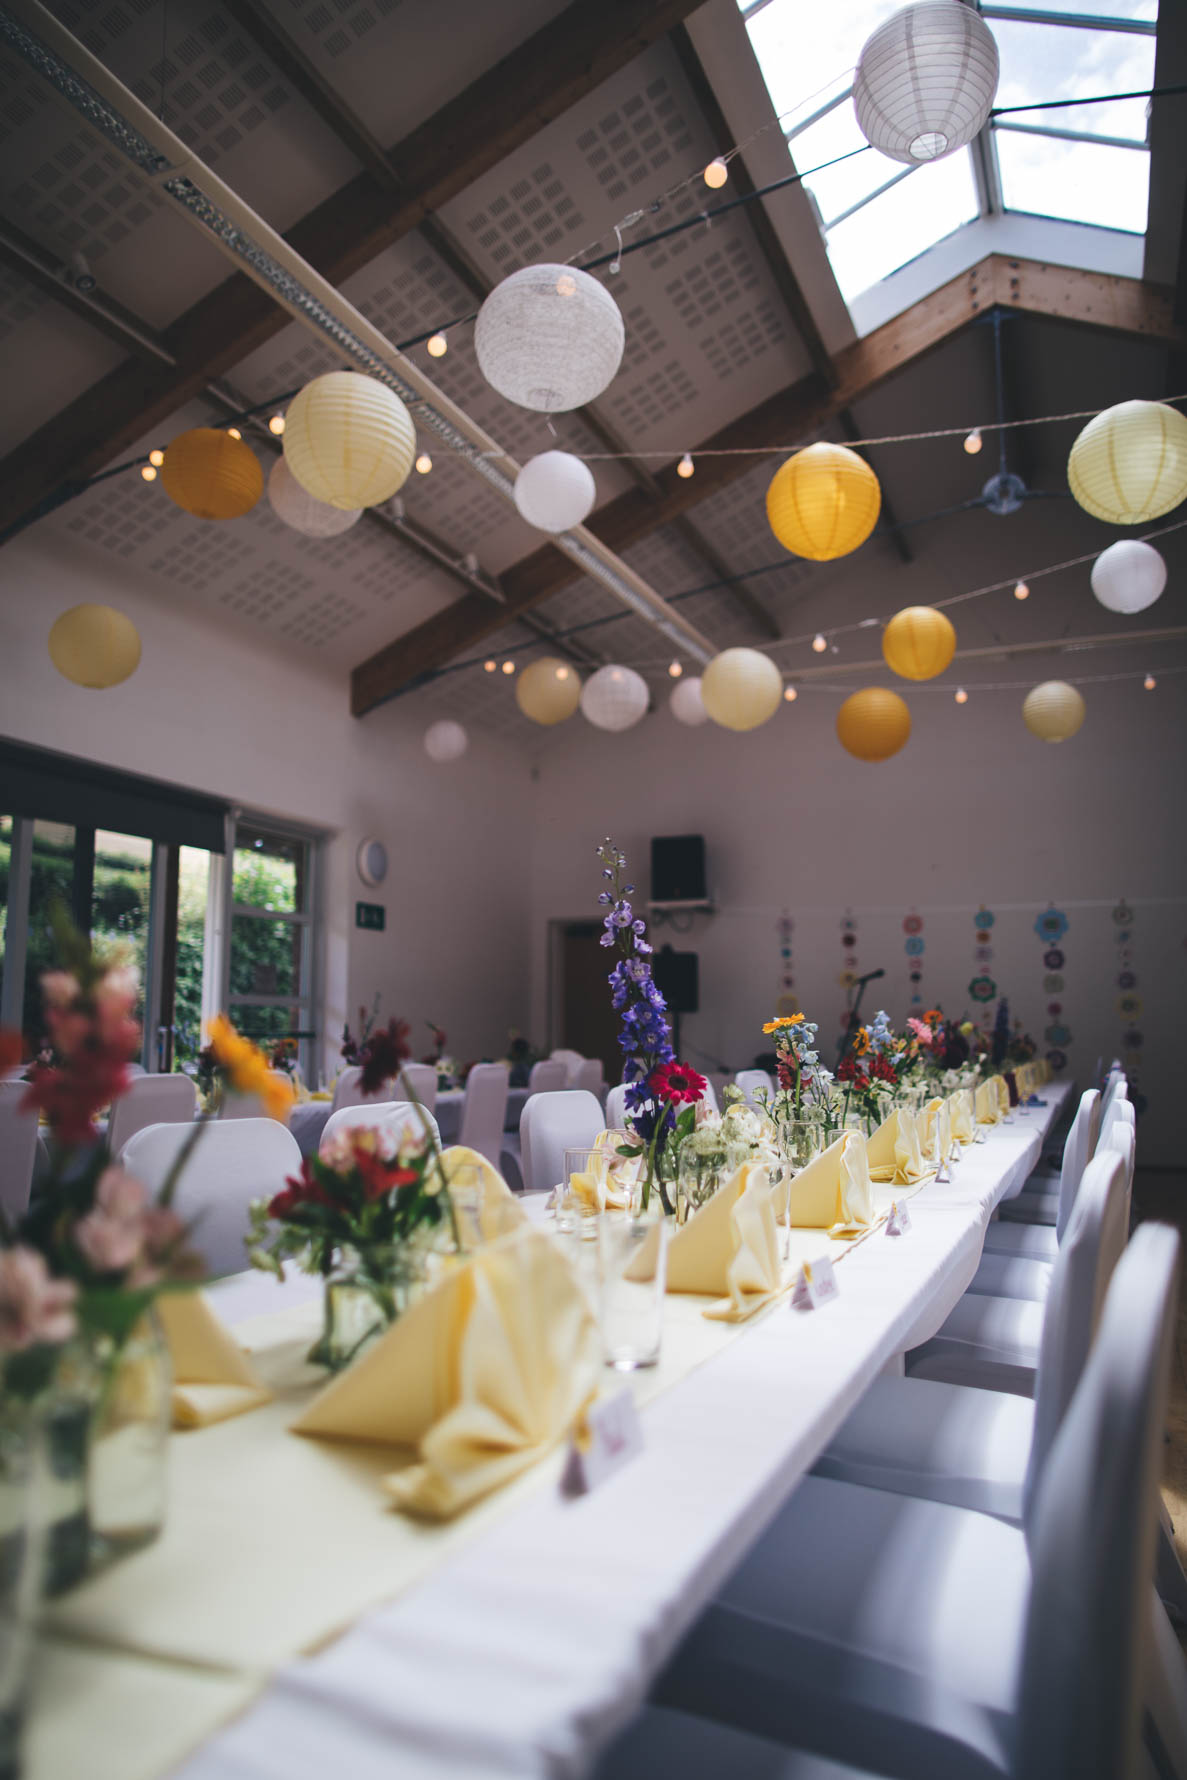 Village hall in Devon decorated for a wedding reception with white chair coverings and long white tables with floral arrangements along the tables. There are white and yellow paper lanterns hung from the beams across the room.